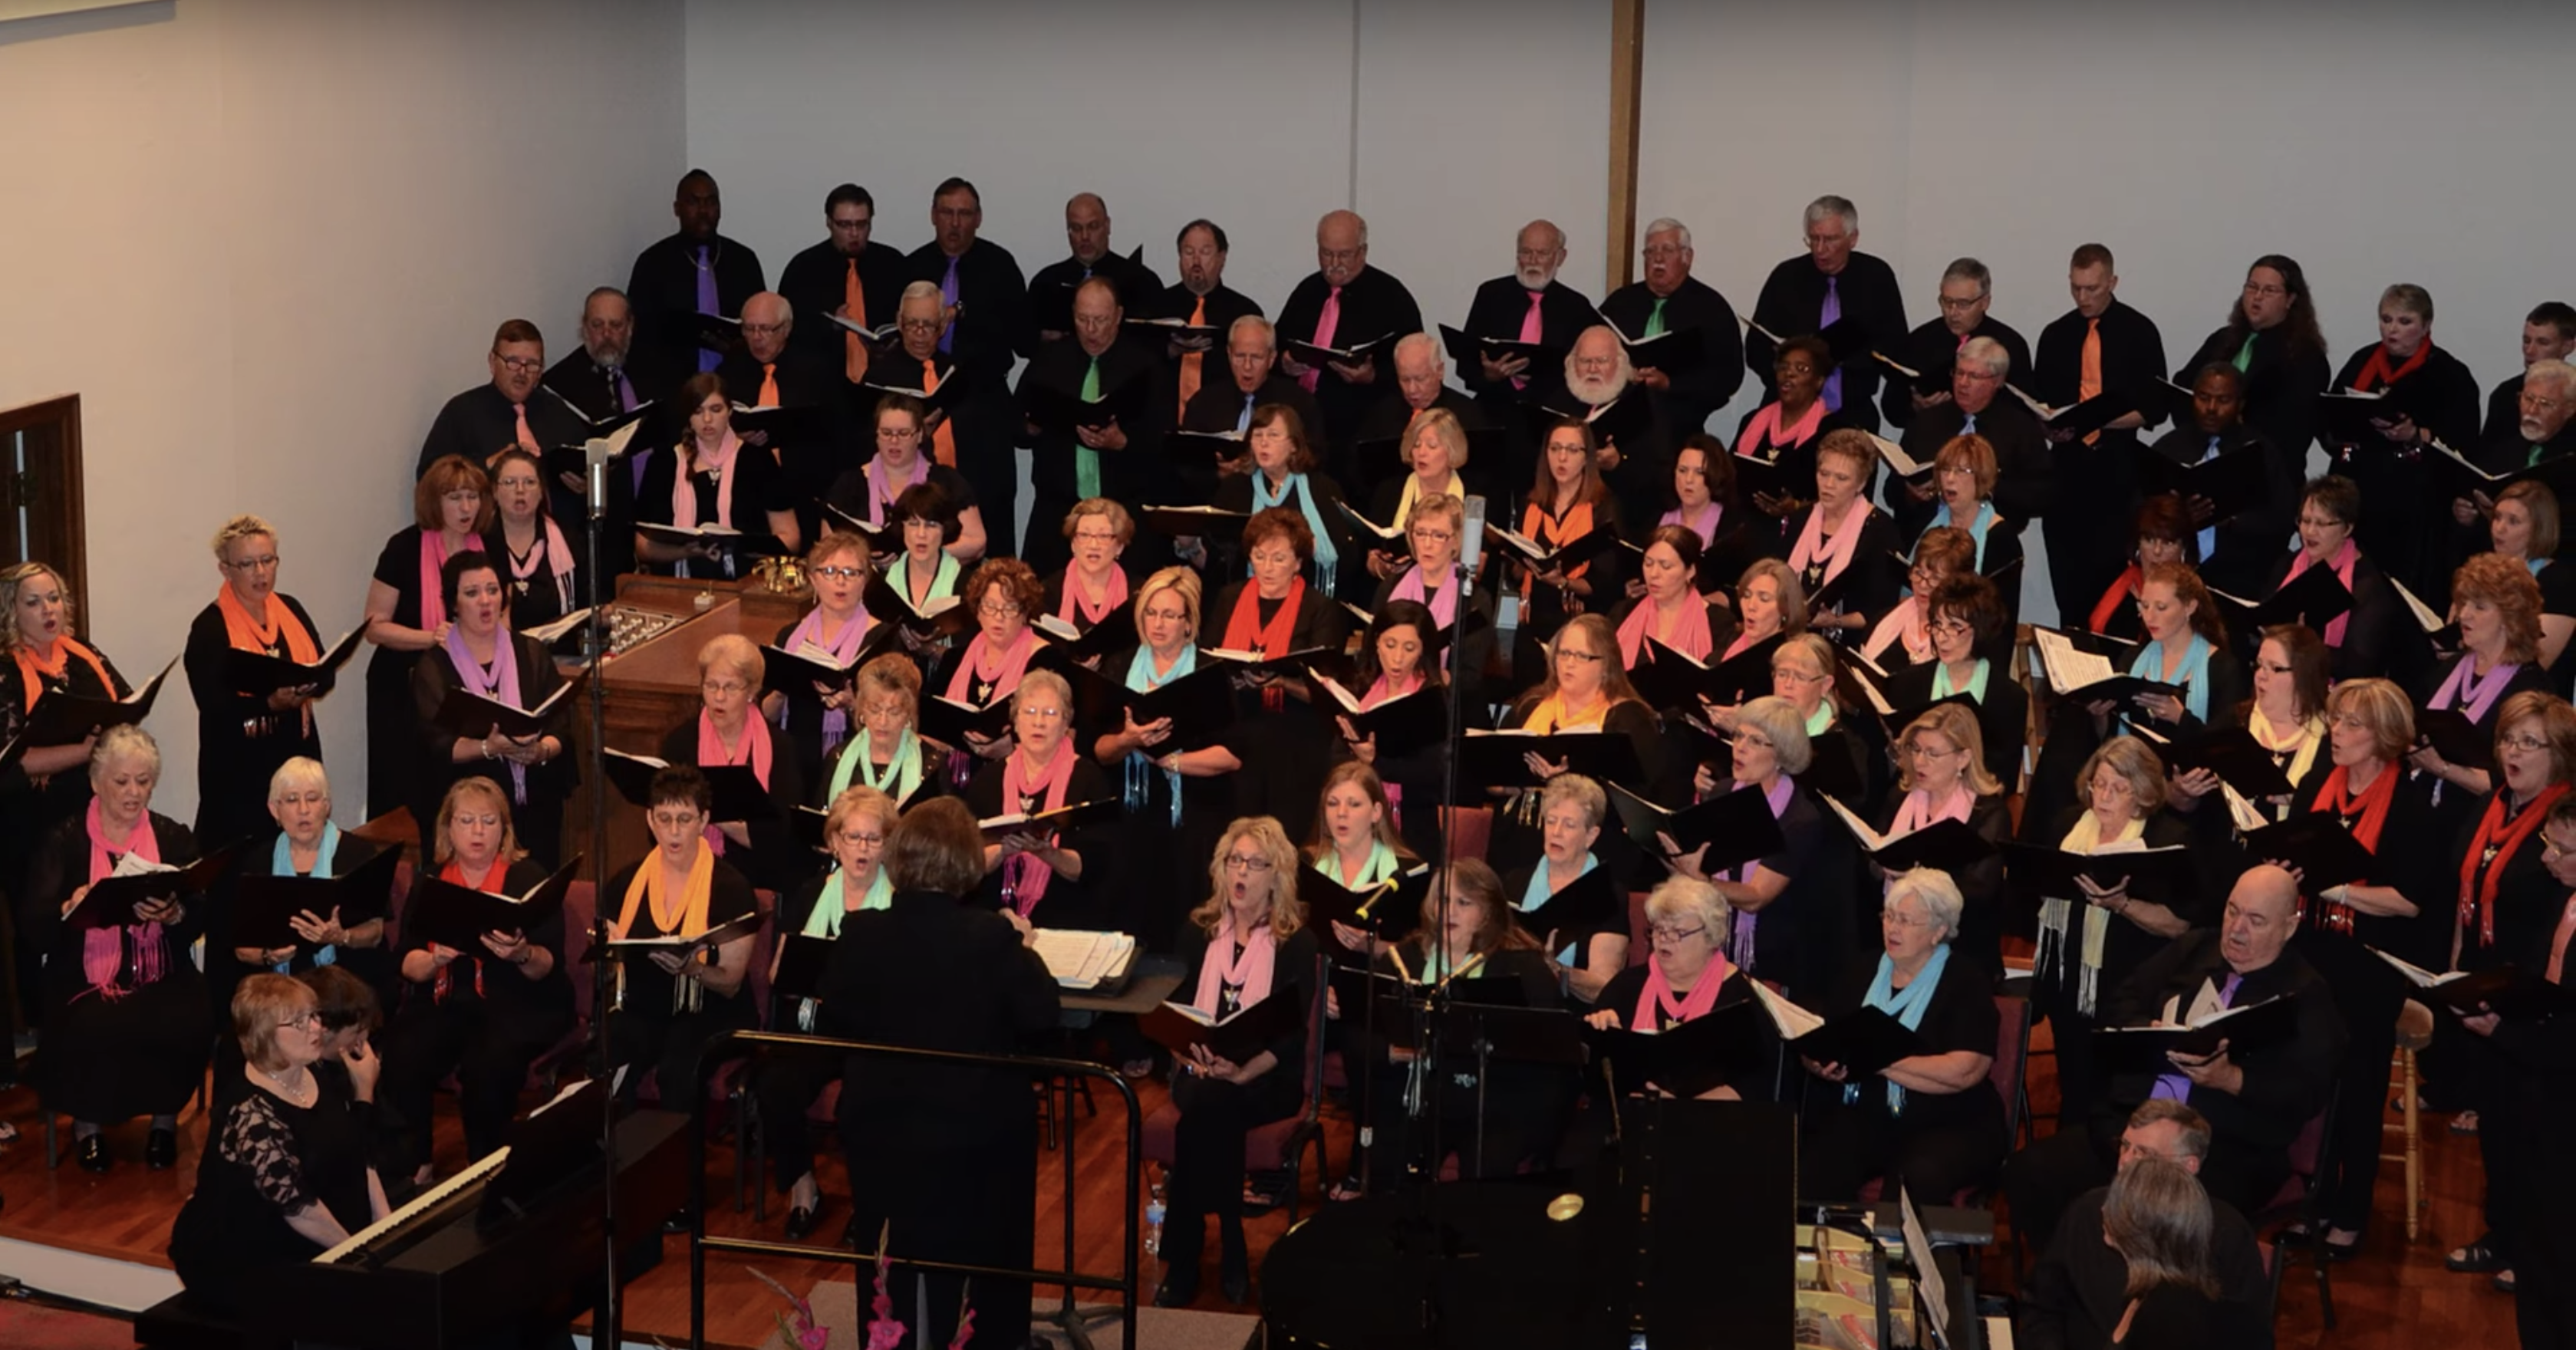 Northeast Texas Choral Society celebrates 25 years of loving music